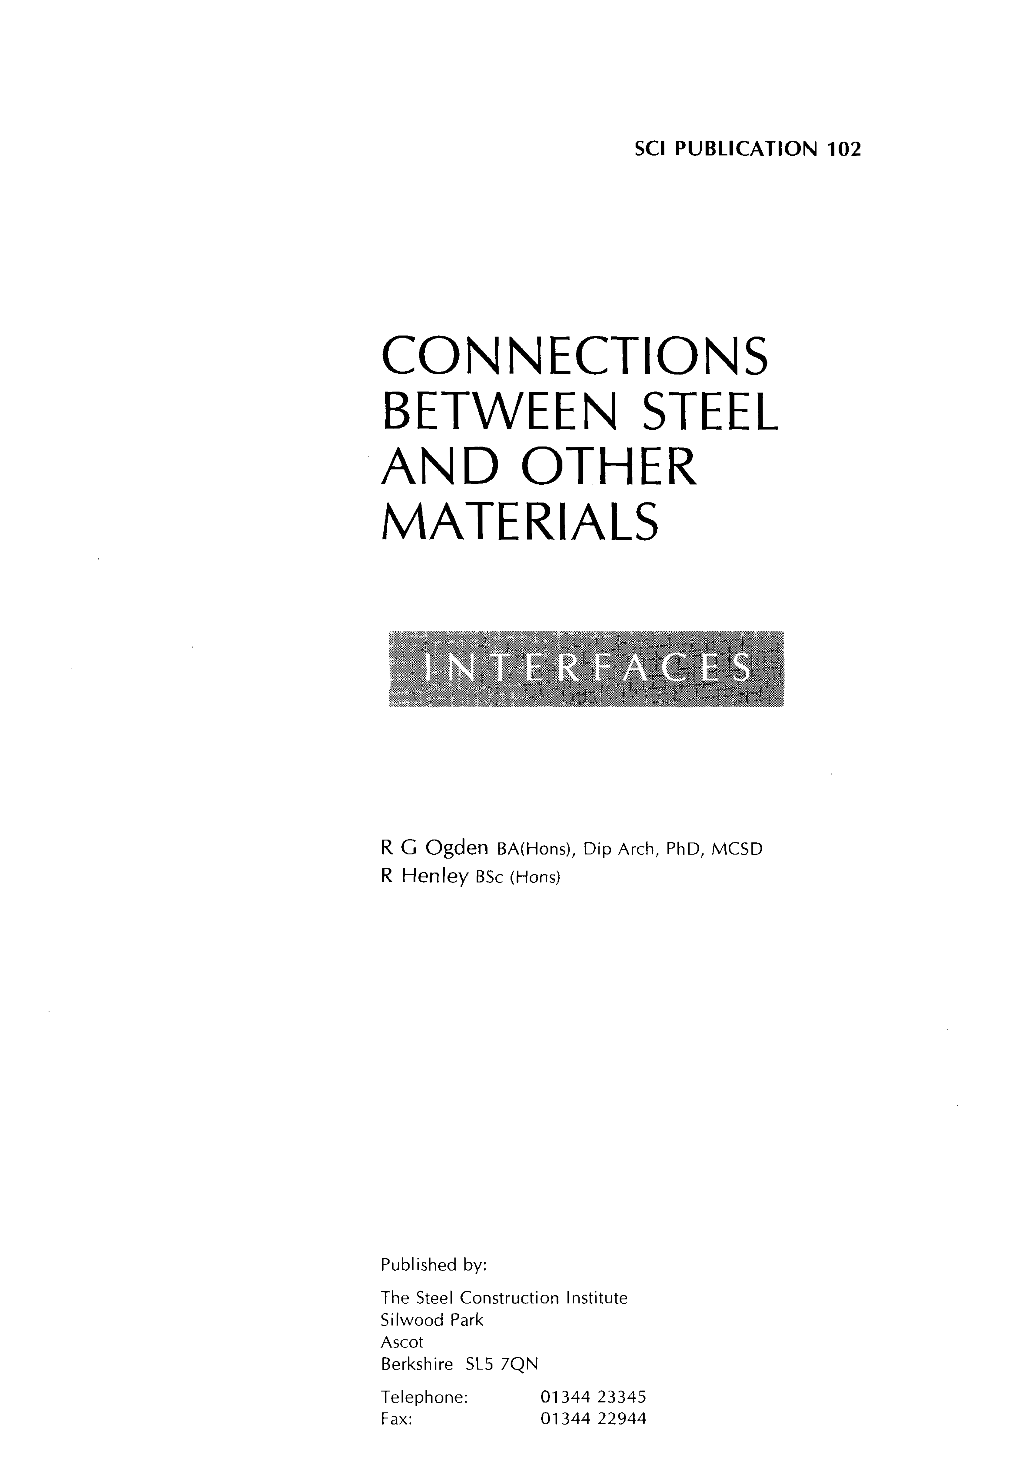 SCI P102 Interfaces: Connections Between Steel and Other Materials